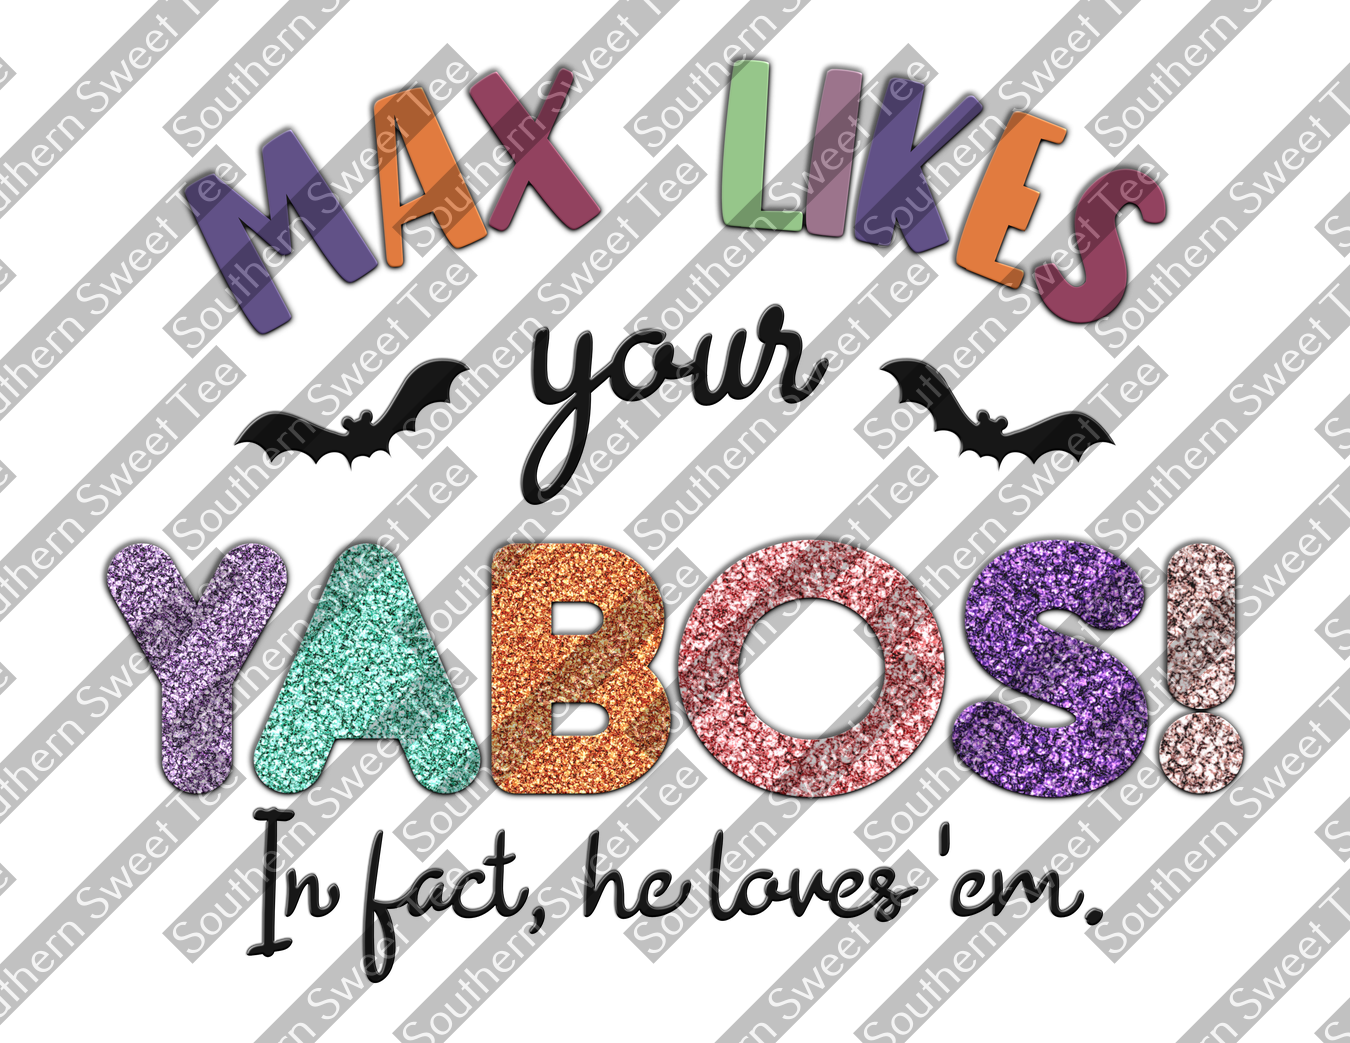 max likes your yabos .bnb